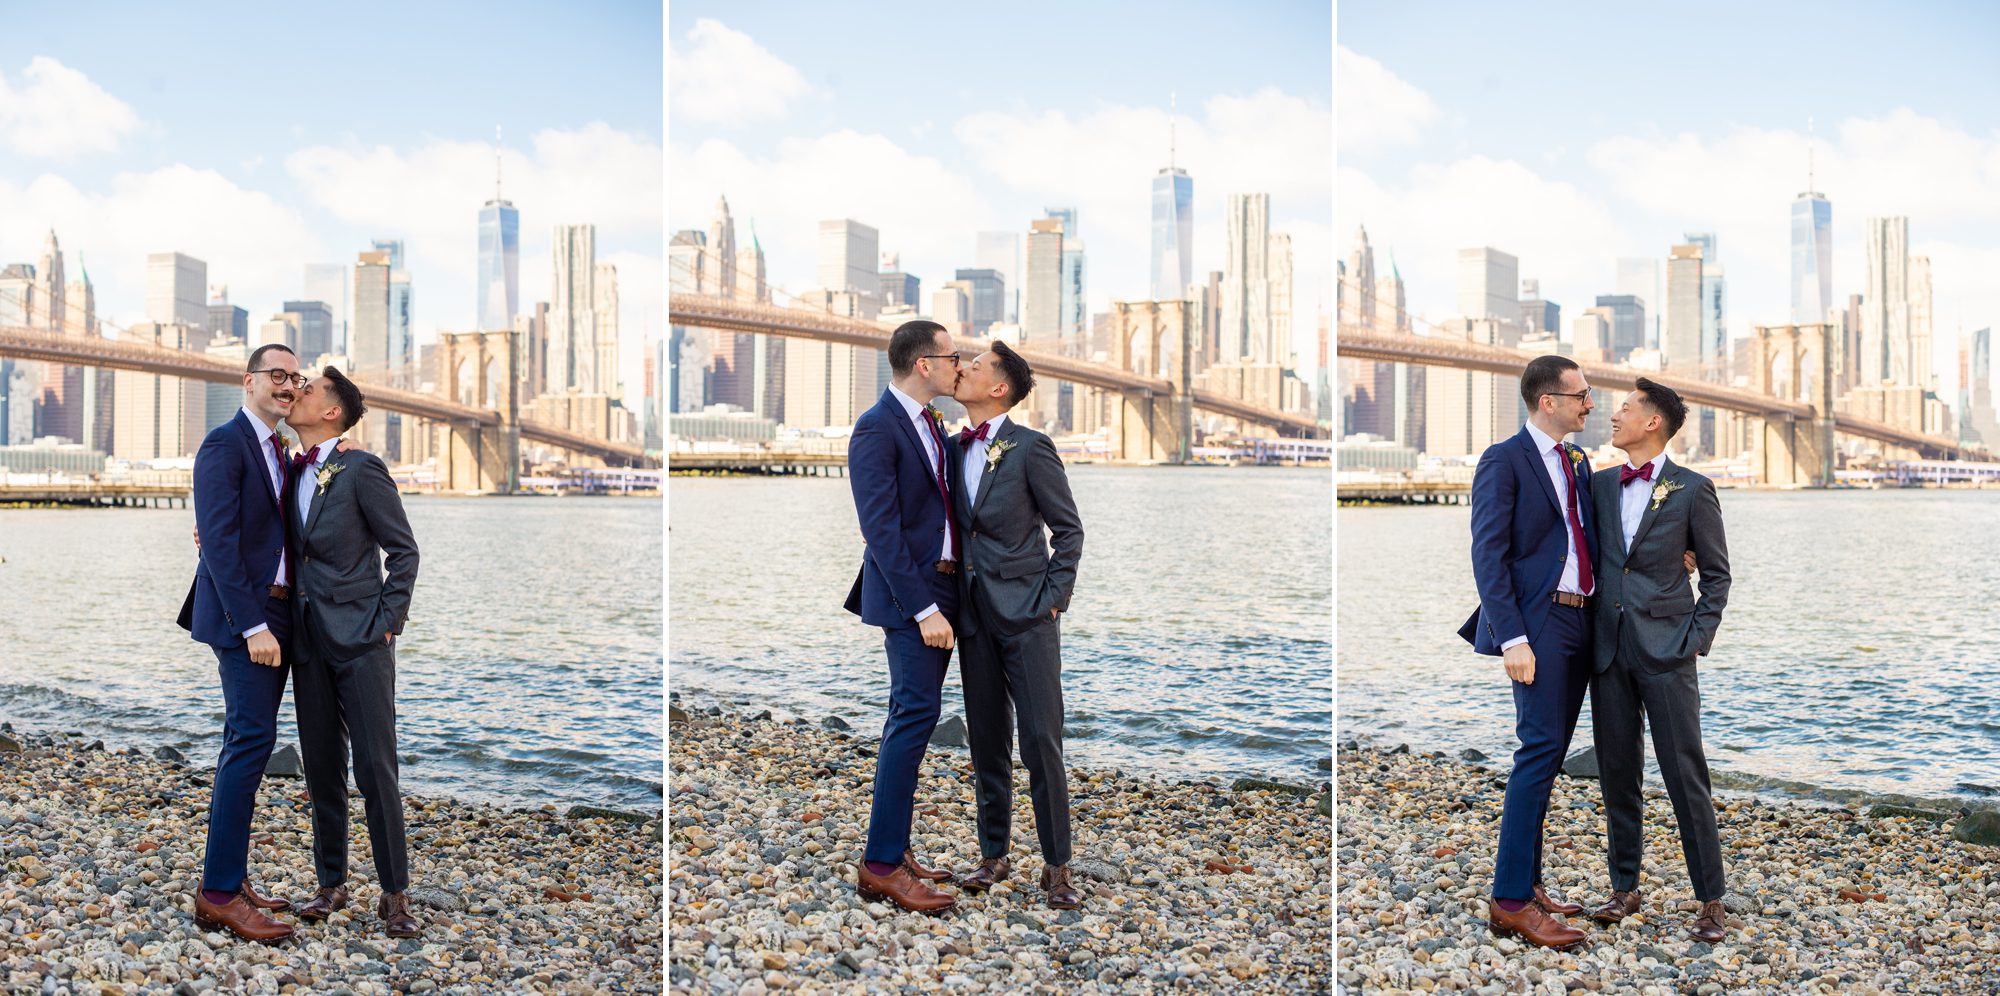 Micro Wedding with Two Grooms LGBTQ 